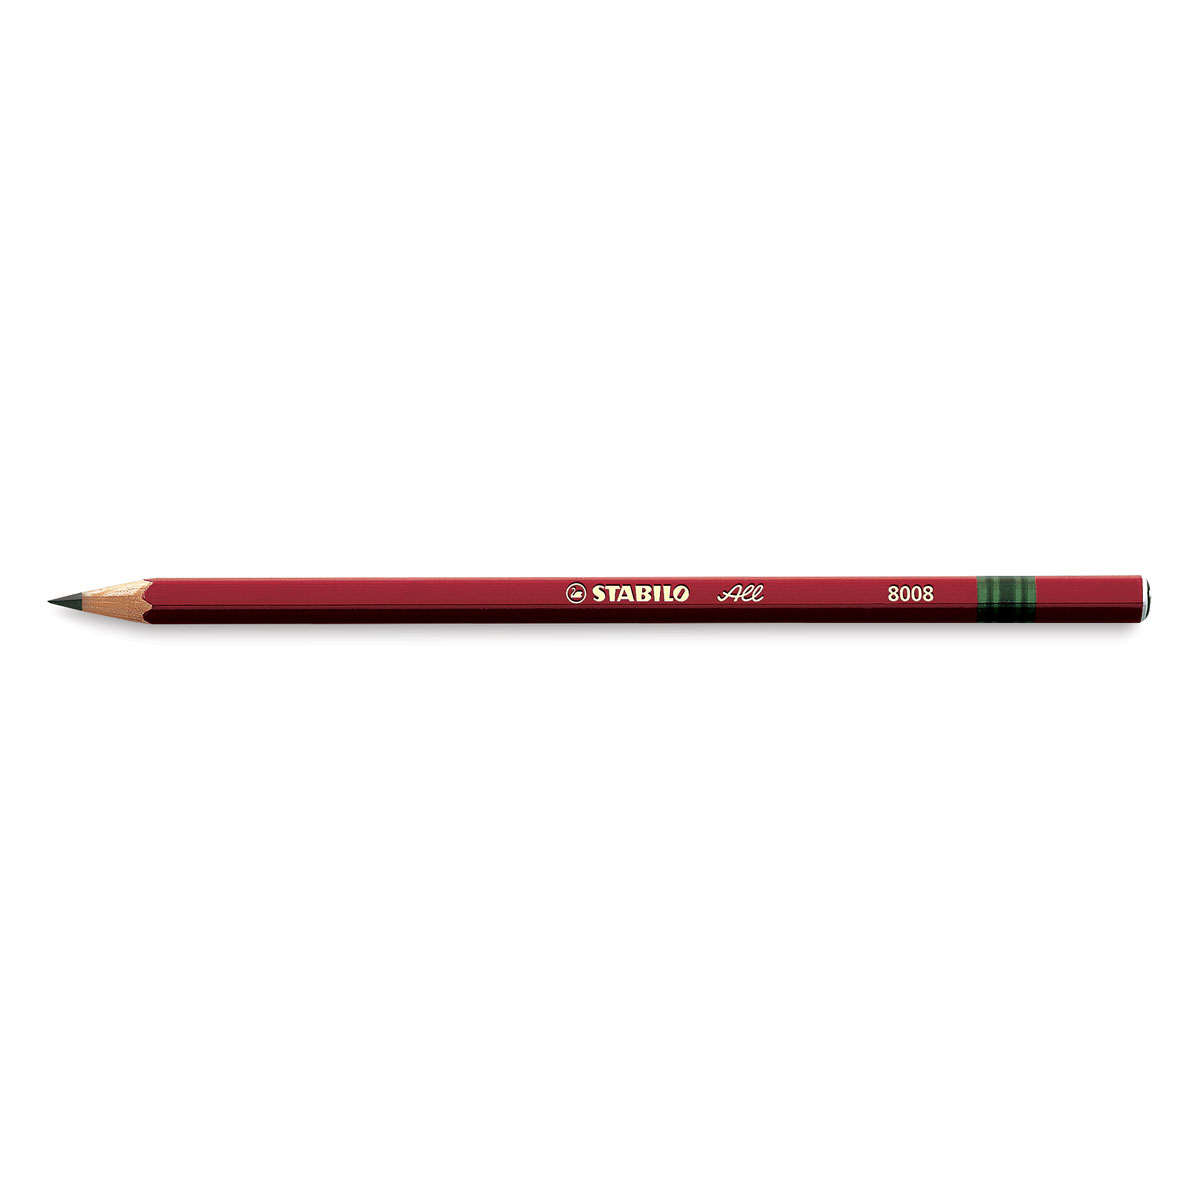 STABILO PENCILS * SOLD BY THE PENCIL * DISCOUNT AT 12